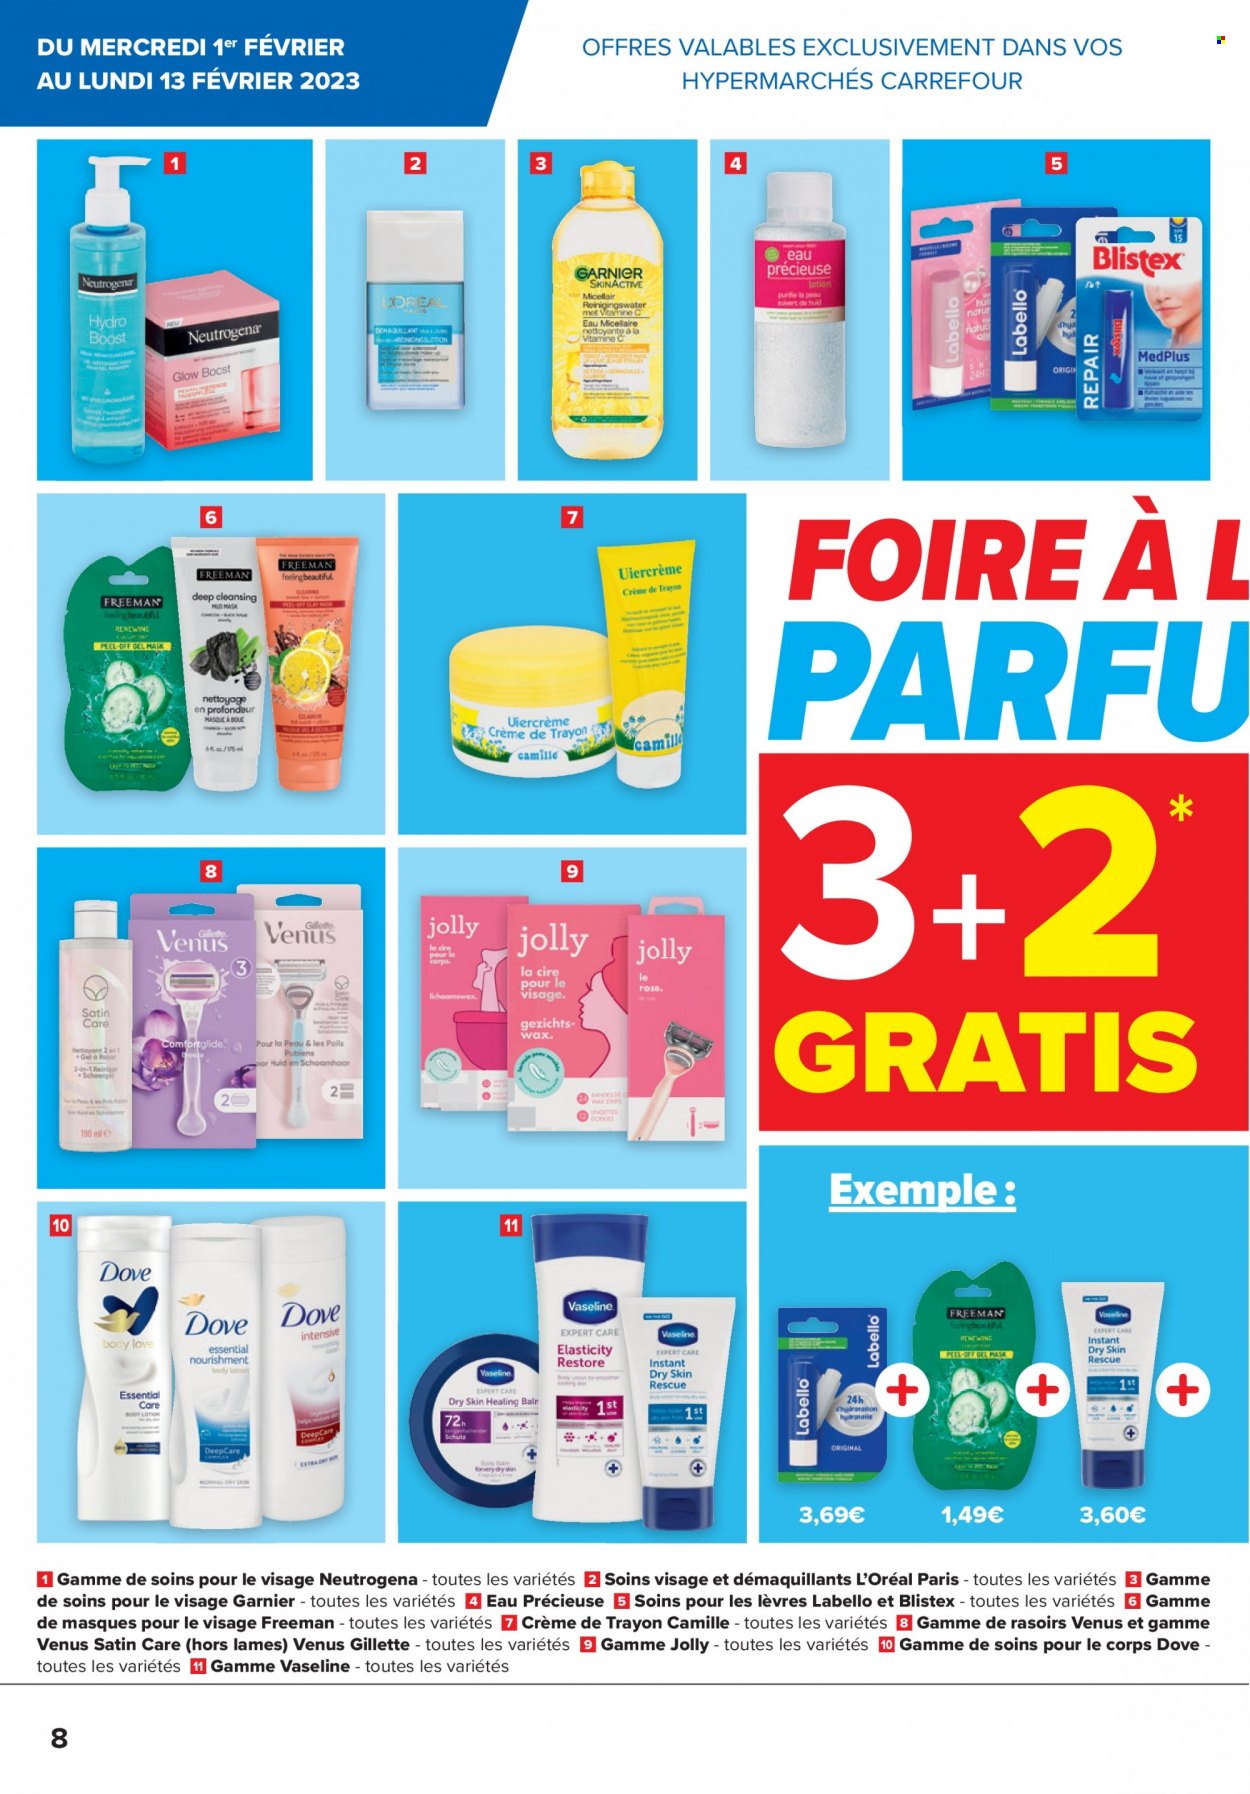 Catalogue Carrefour hypermarkt - 1.2.2023 - 13.2.2023. Page 8.